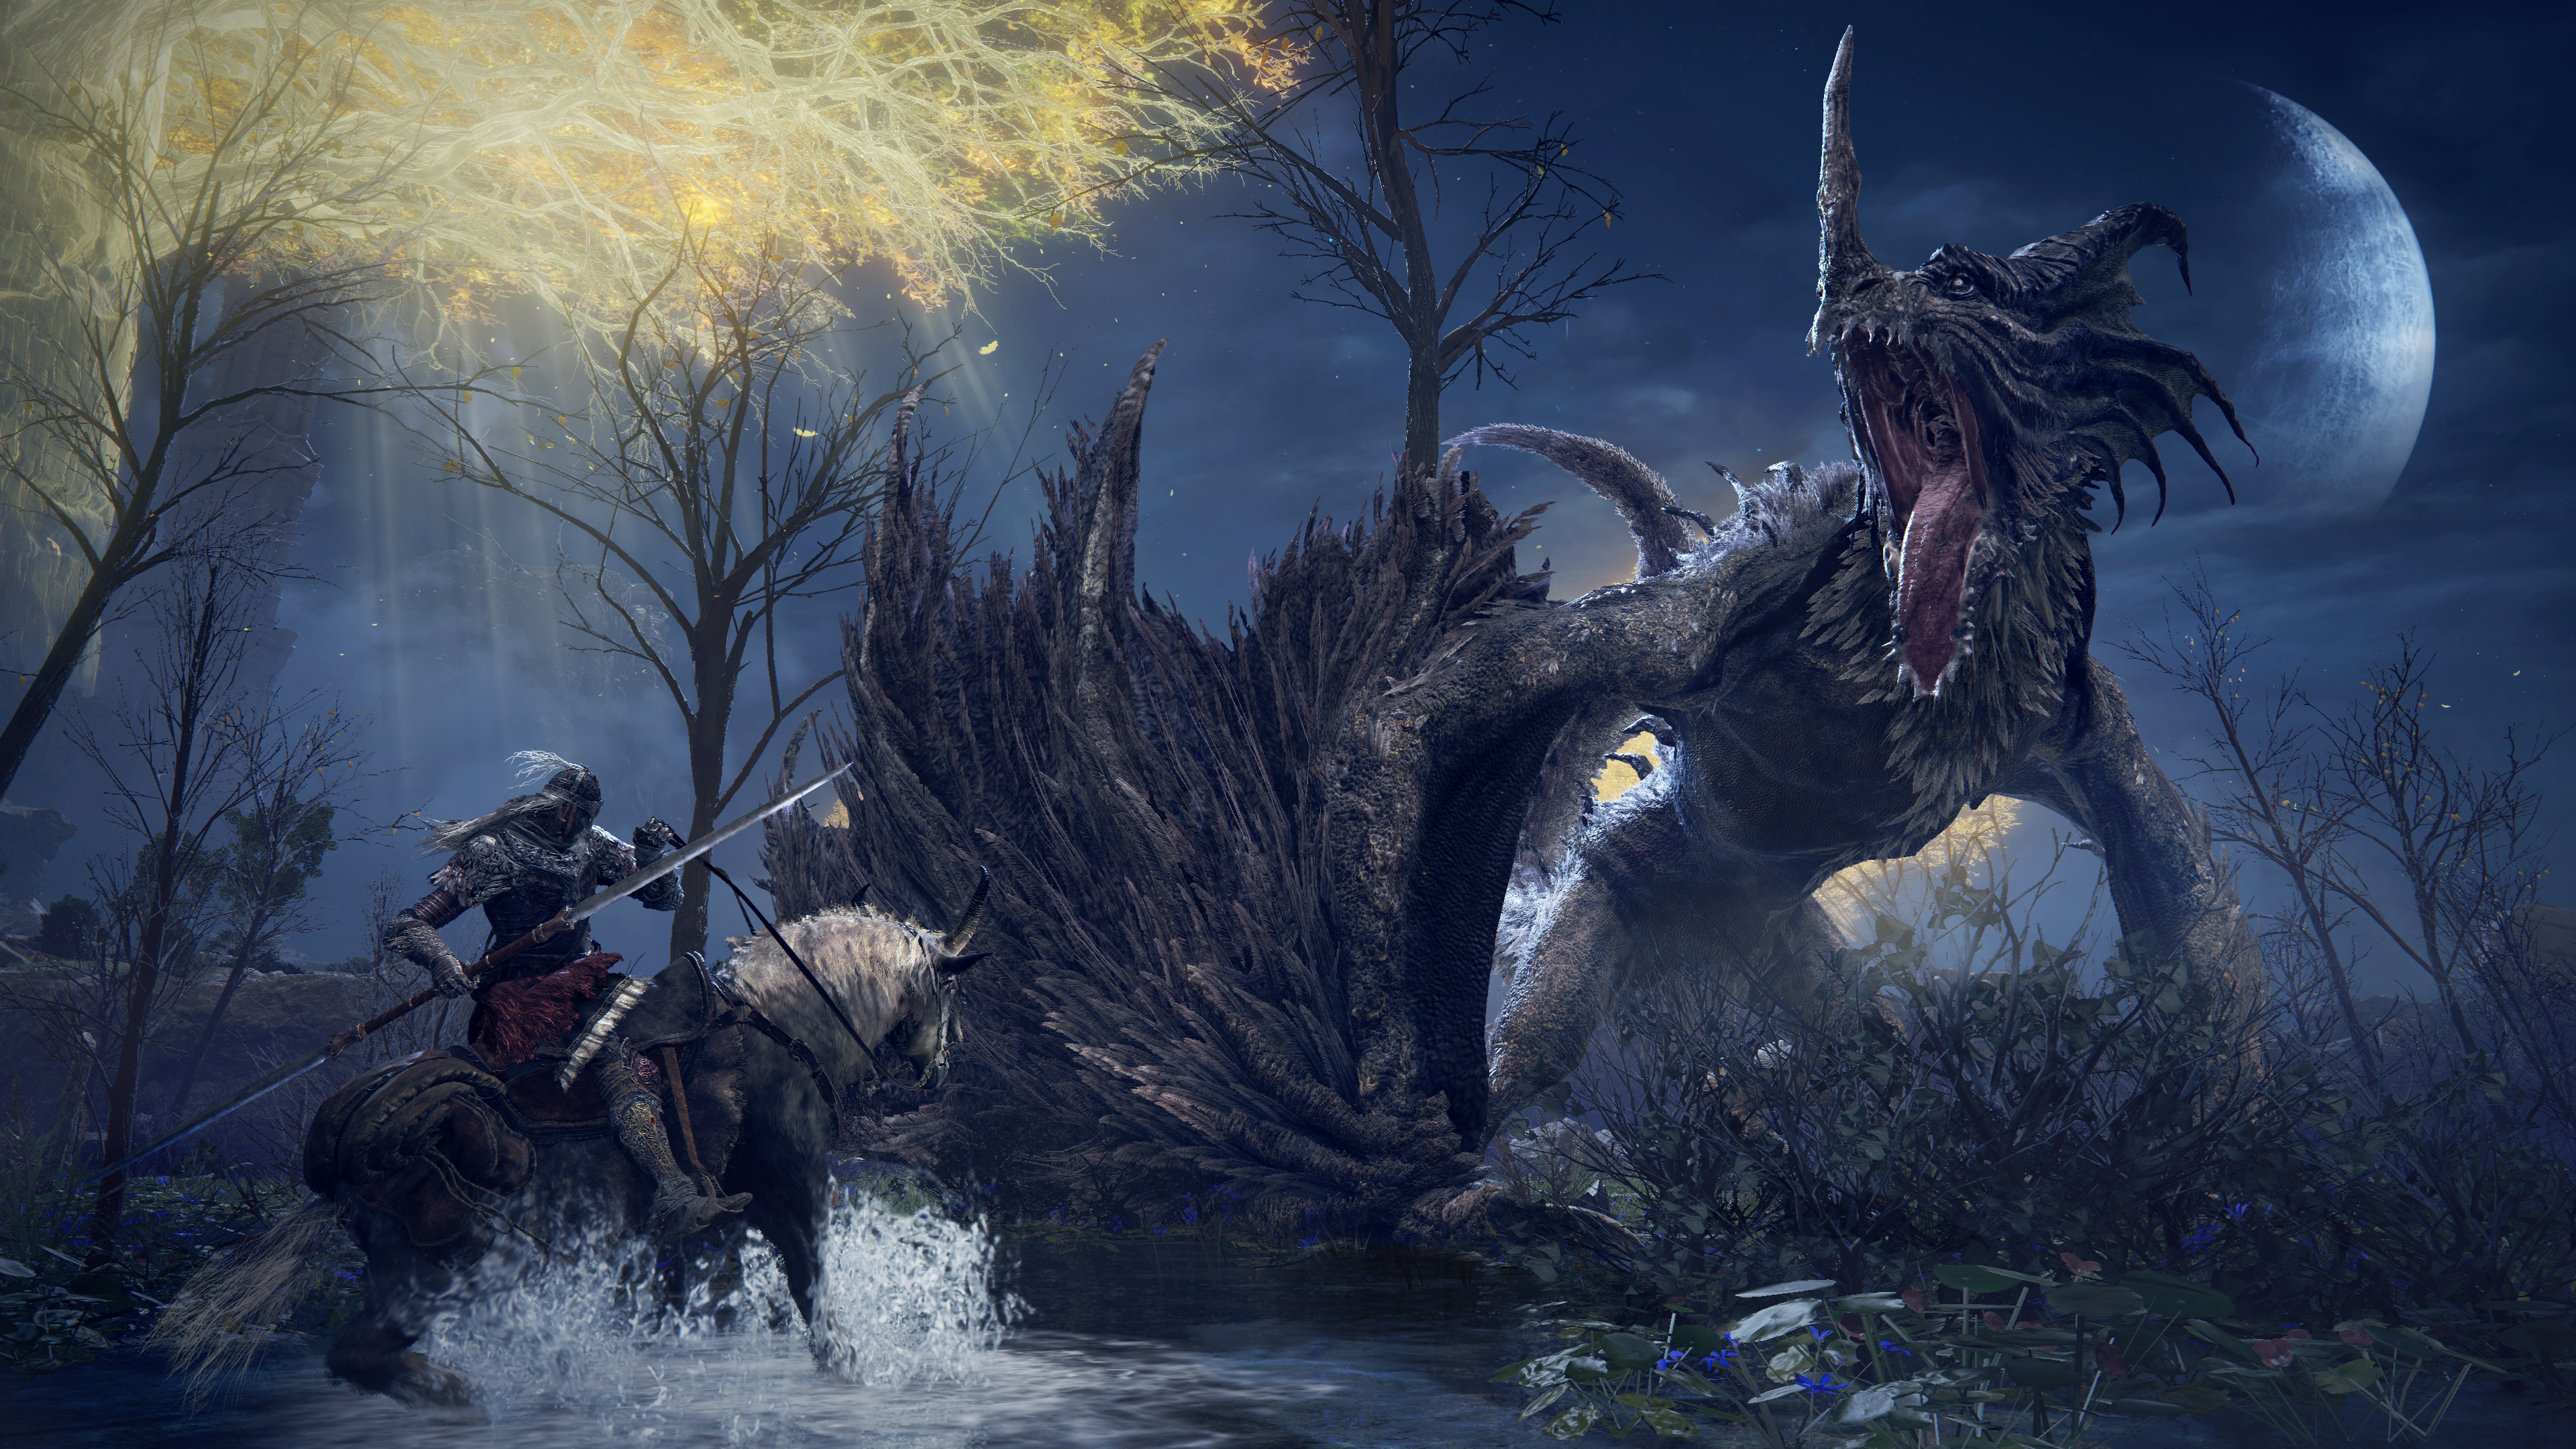 A Tarnished on horseback battles a dragon beneath the moon in Elden Ring